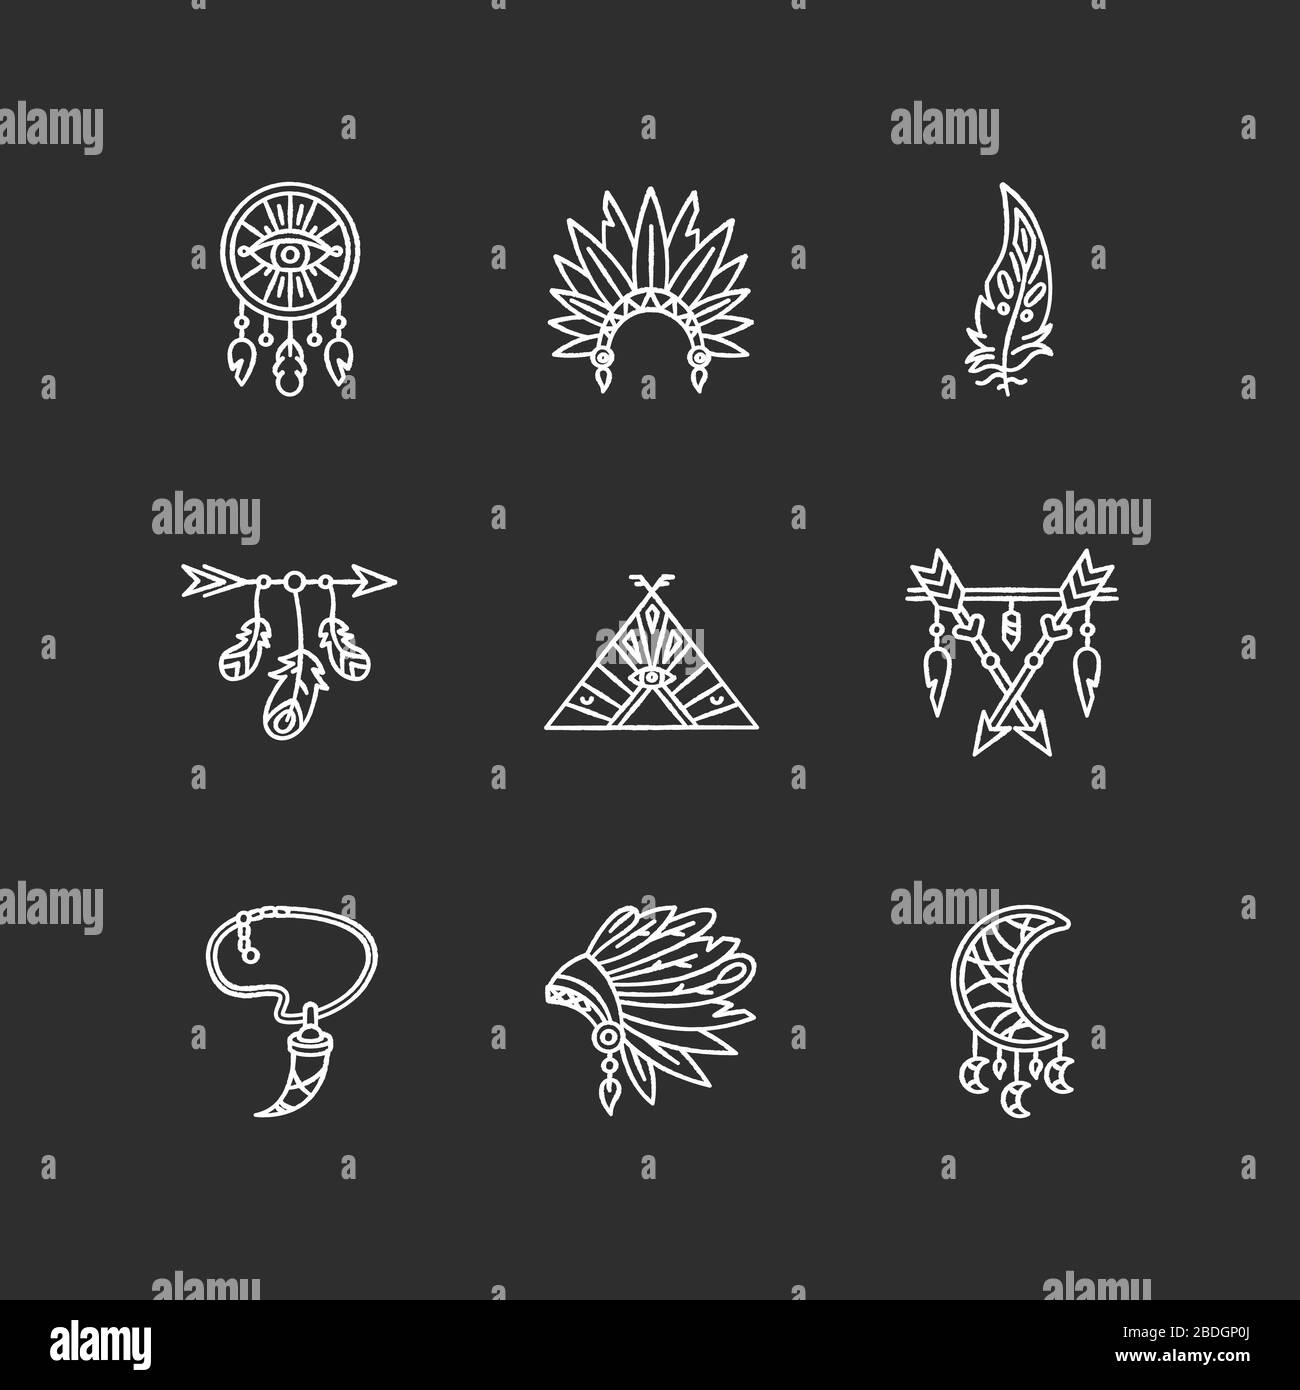 Native american indian accessories chalk white icons set on black background. Boho style dreamcatcher. Necklace with tooth, arrow with feathers Stock Vector